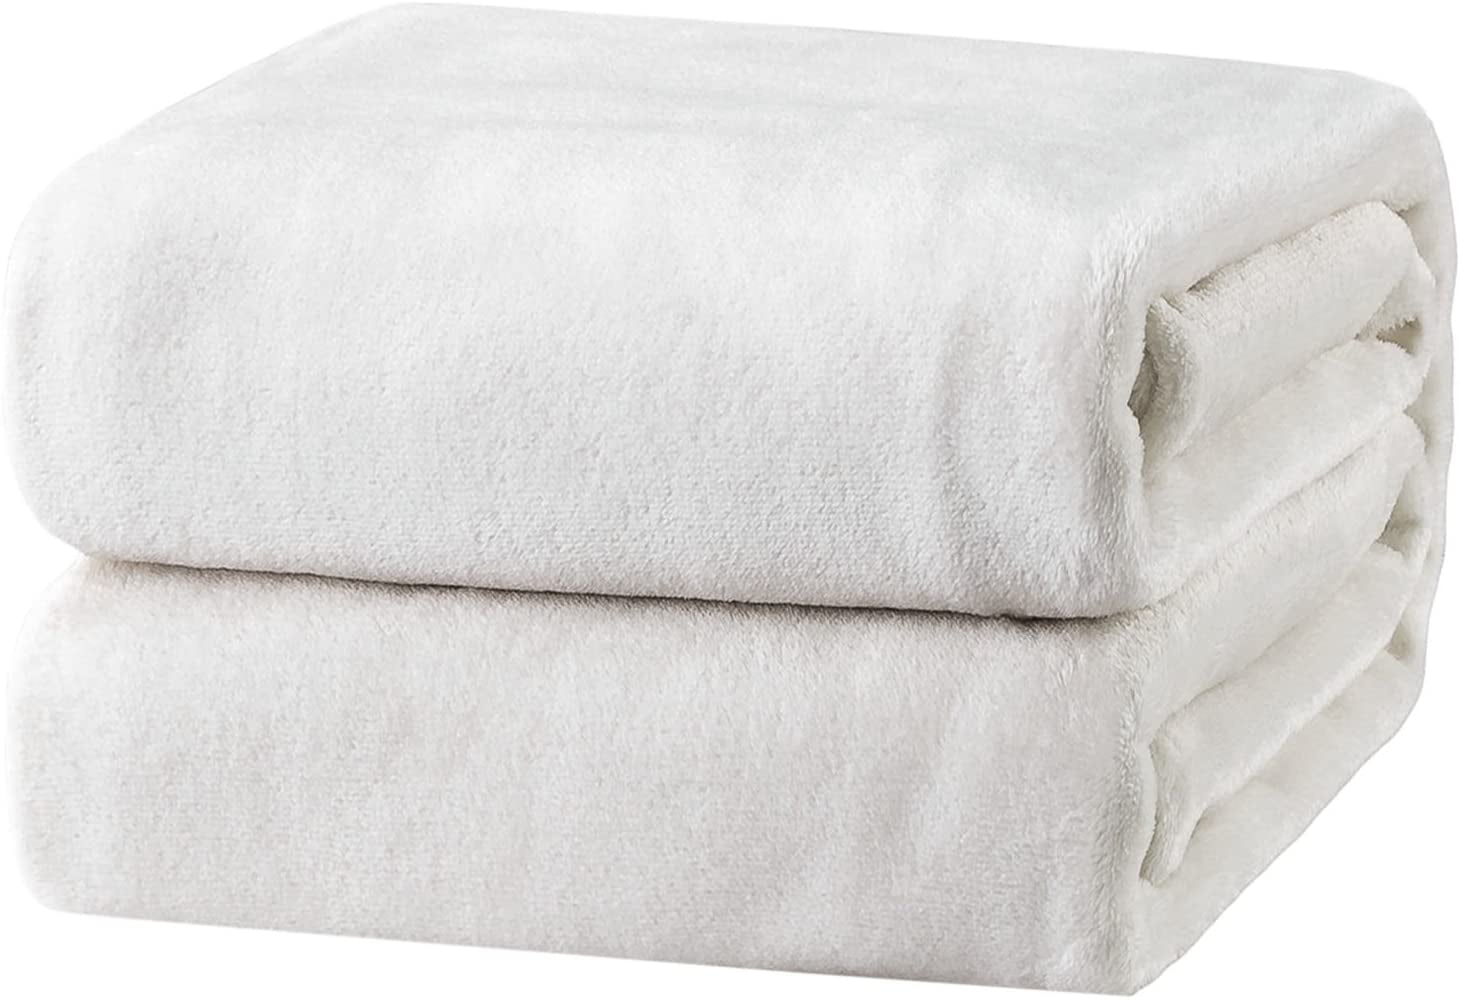 Details about   Bedsure Luxury Flannel Fleece Blankets Plush Blankets Throw Microfiber Bed Soft 